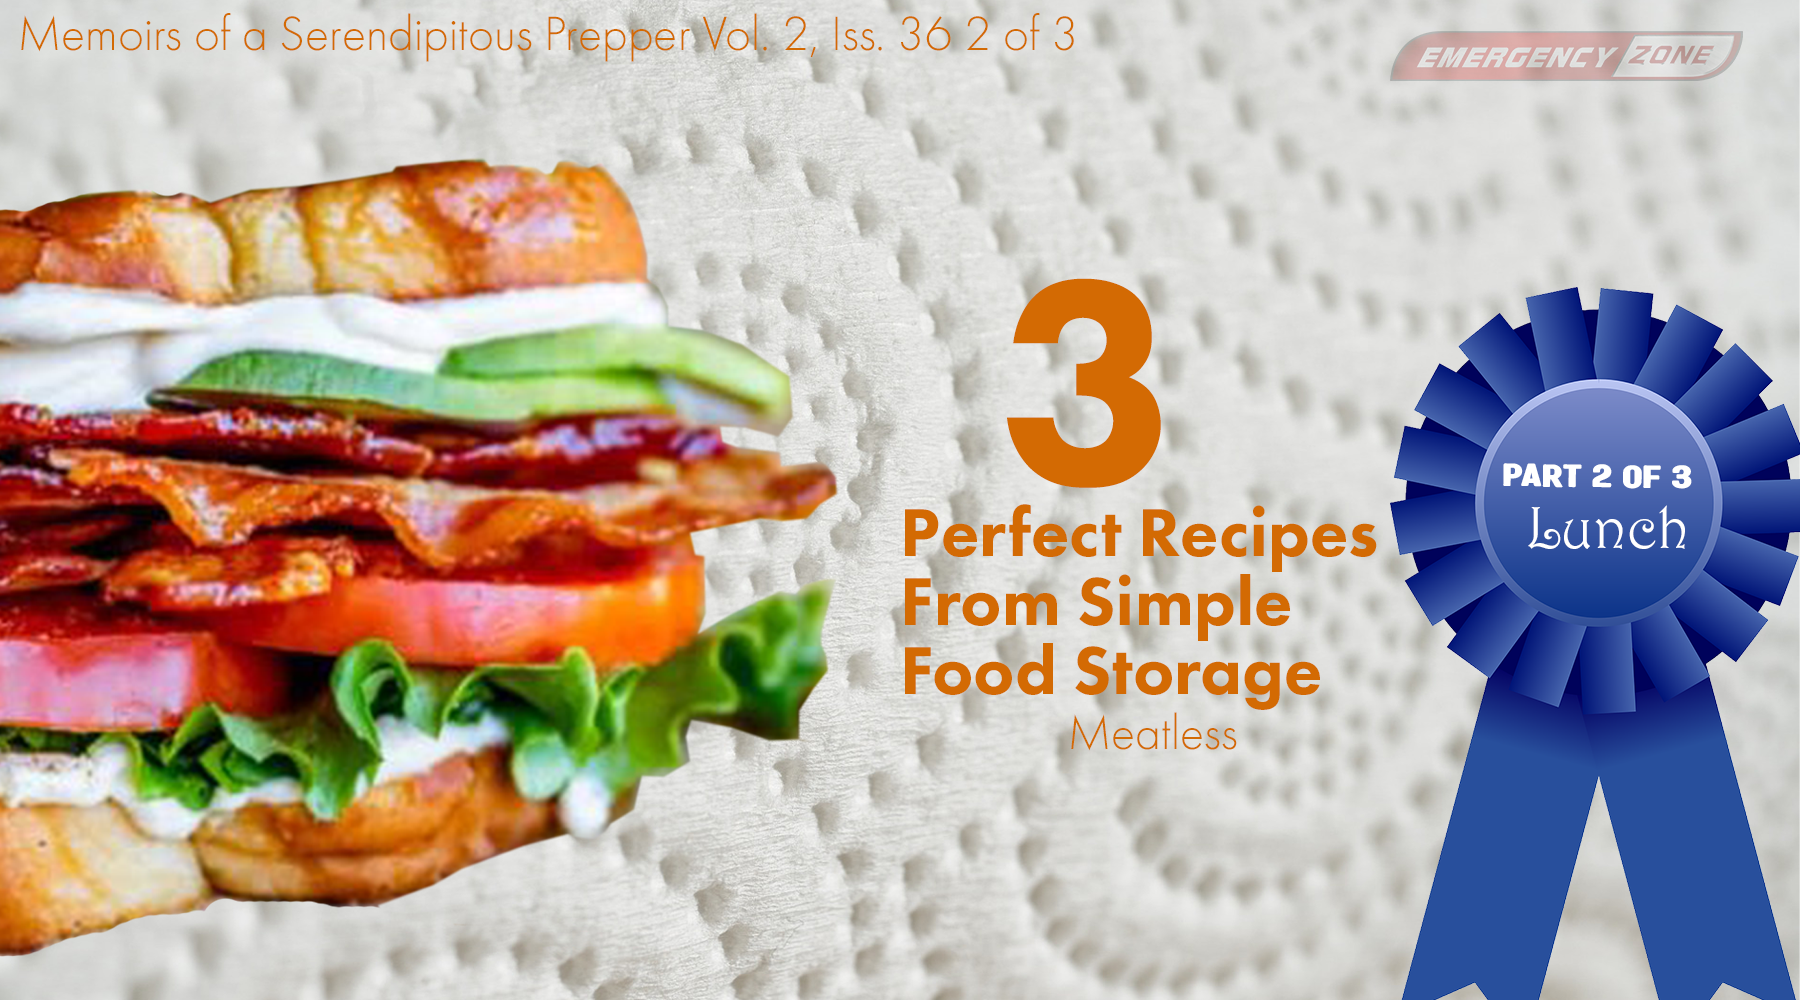 3 Perfect Recipes From Simple Food Storage 2 of 3